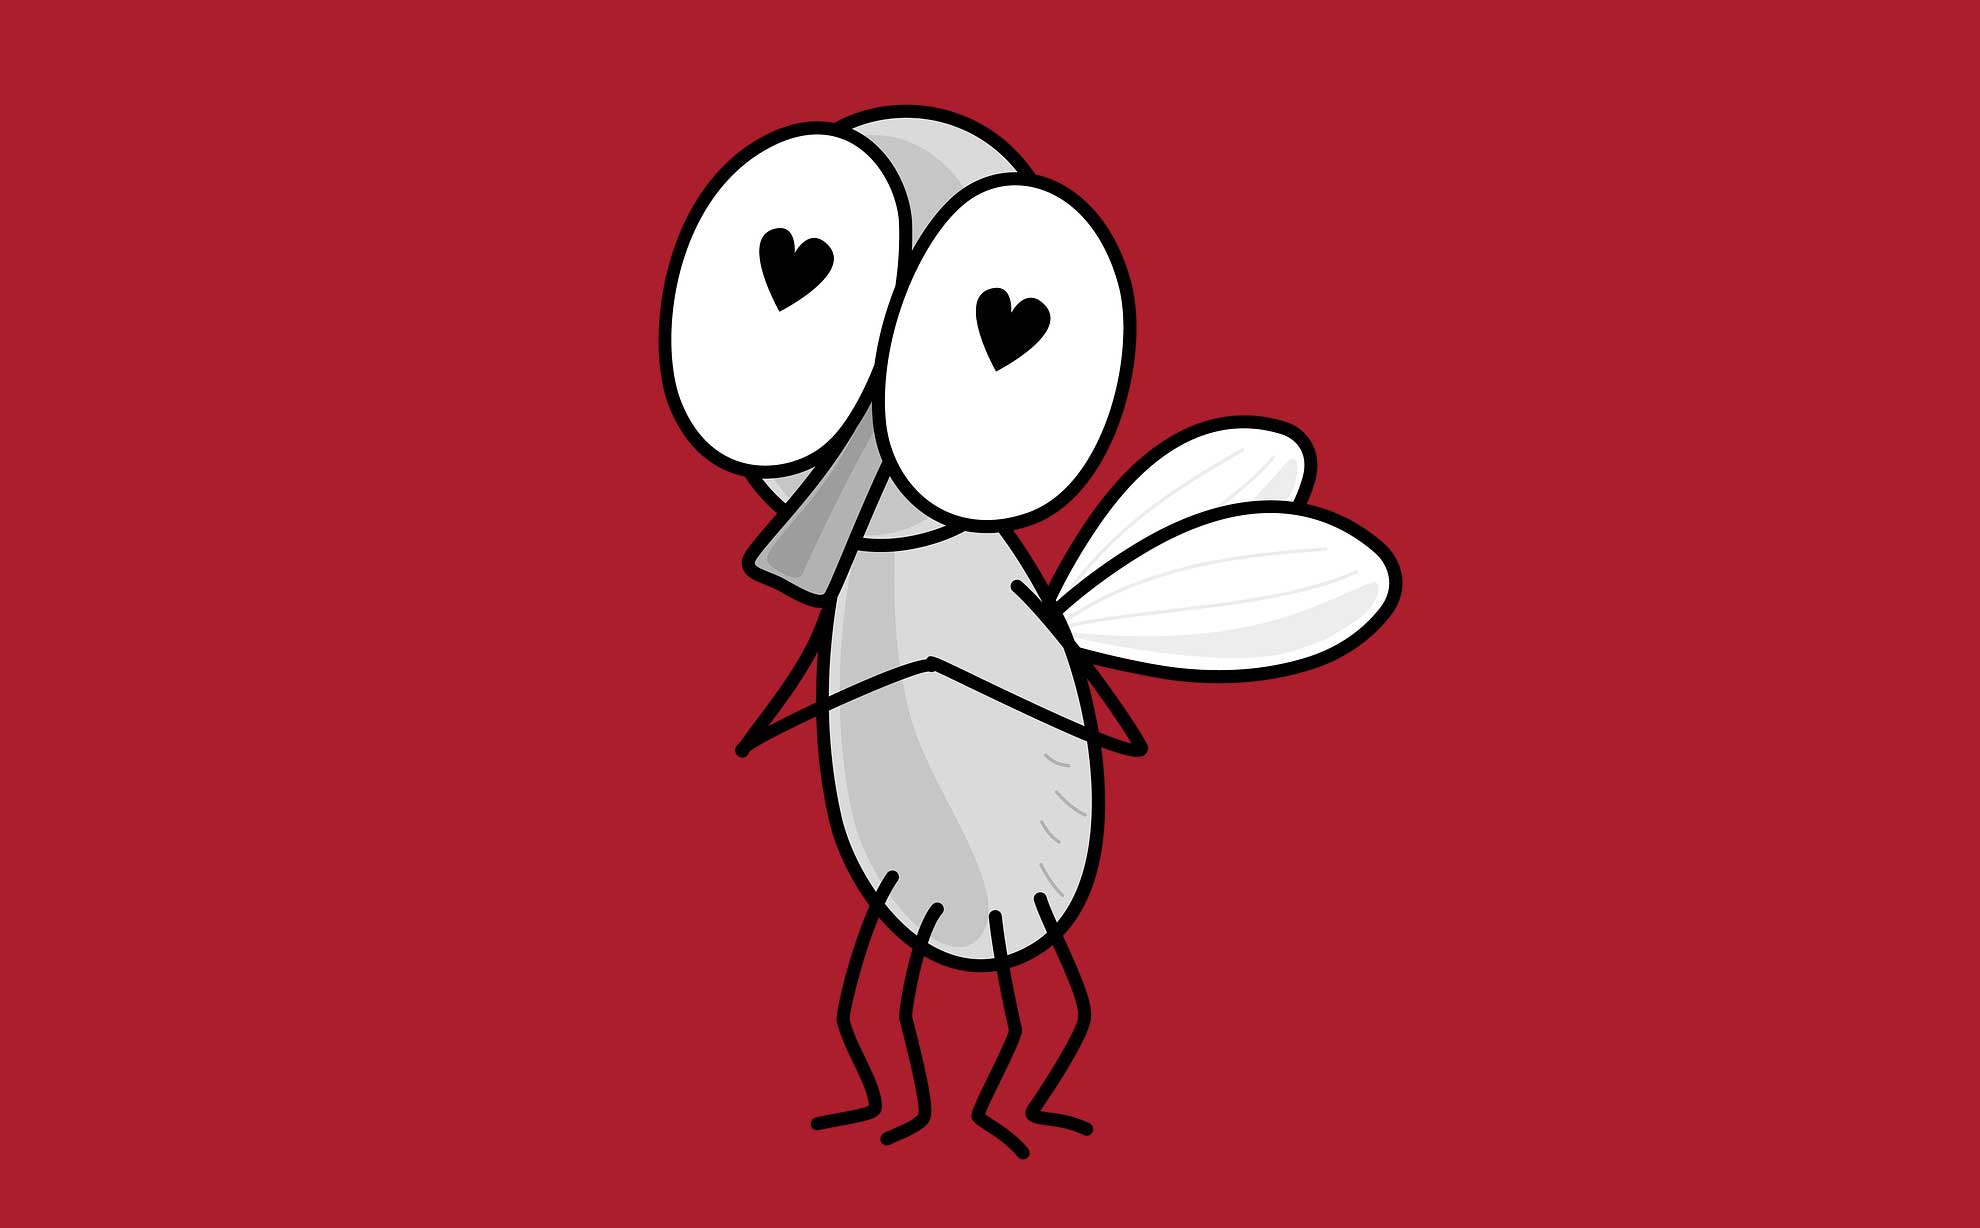 Insect with hearts in its eyes on a red background.